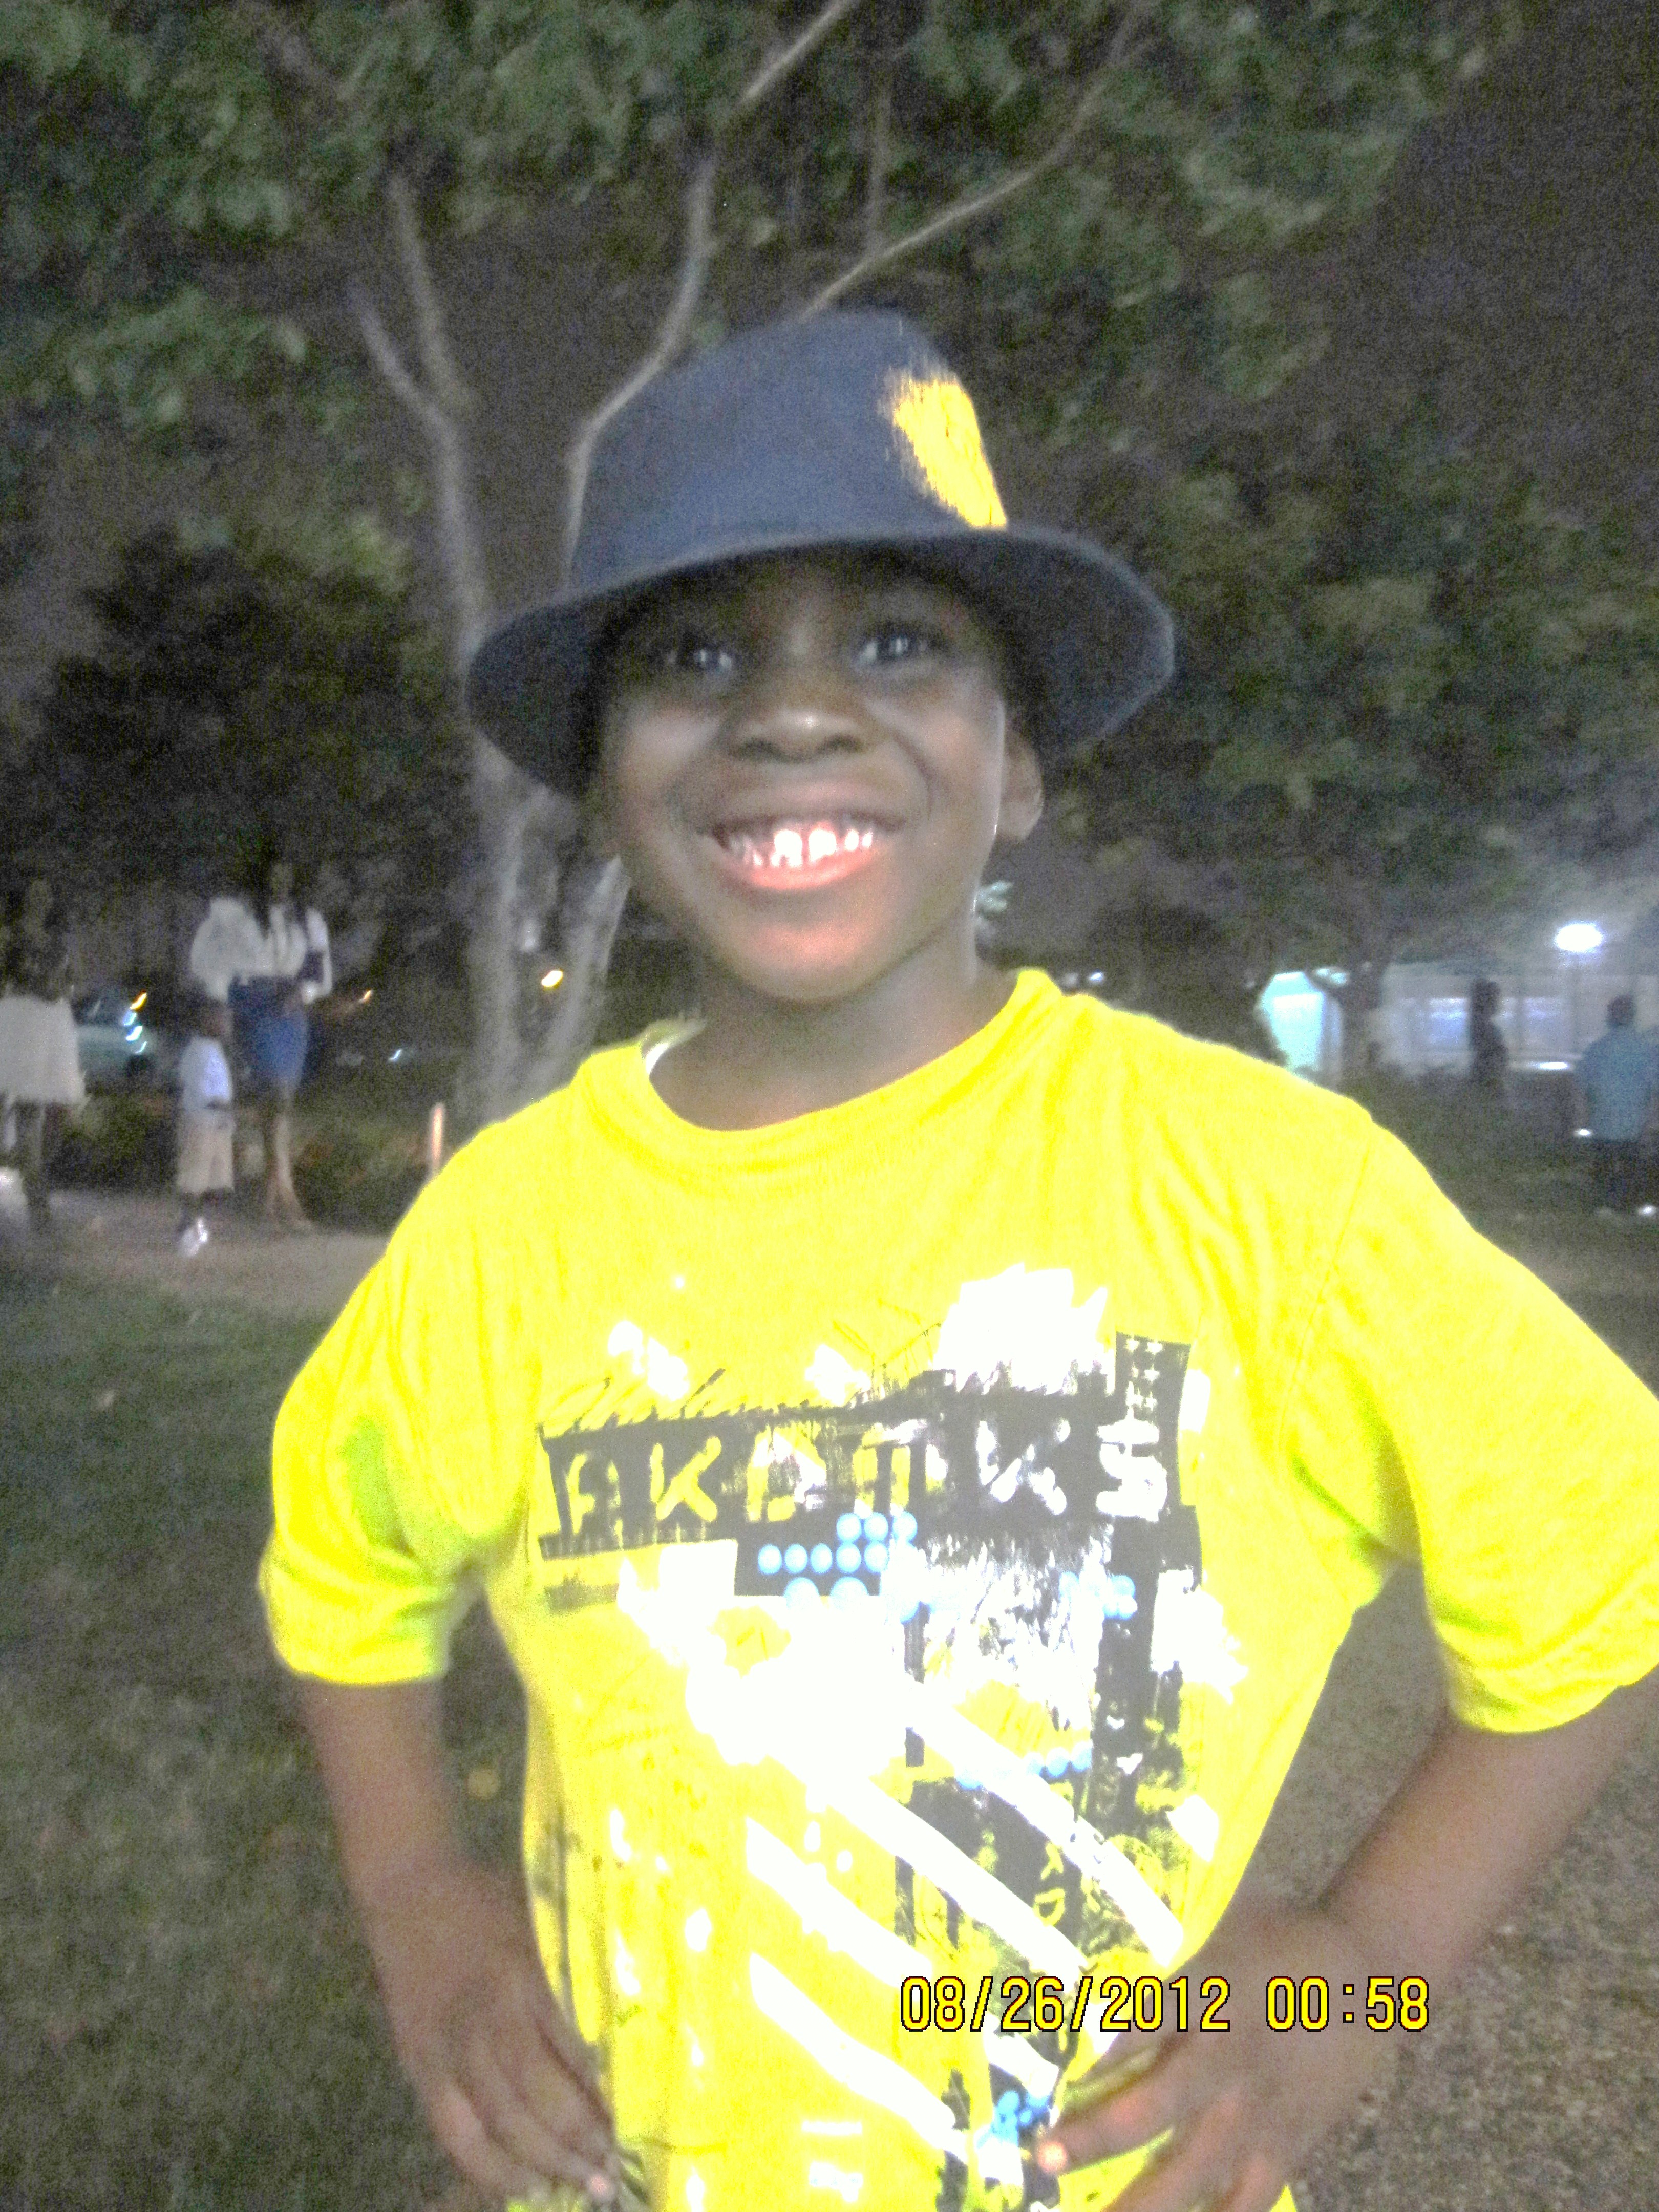 A young boy smiling at night, wearing a yellow graphic t-shirt and a blue hat, with trees and people in the background.